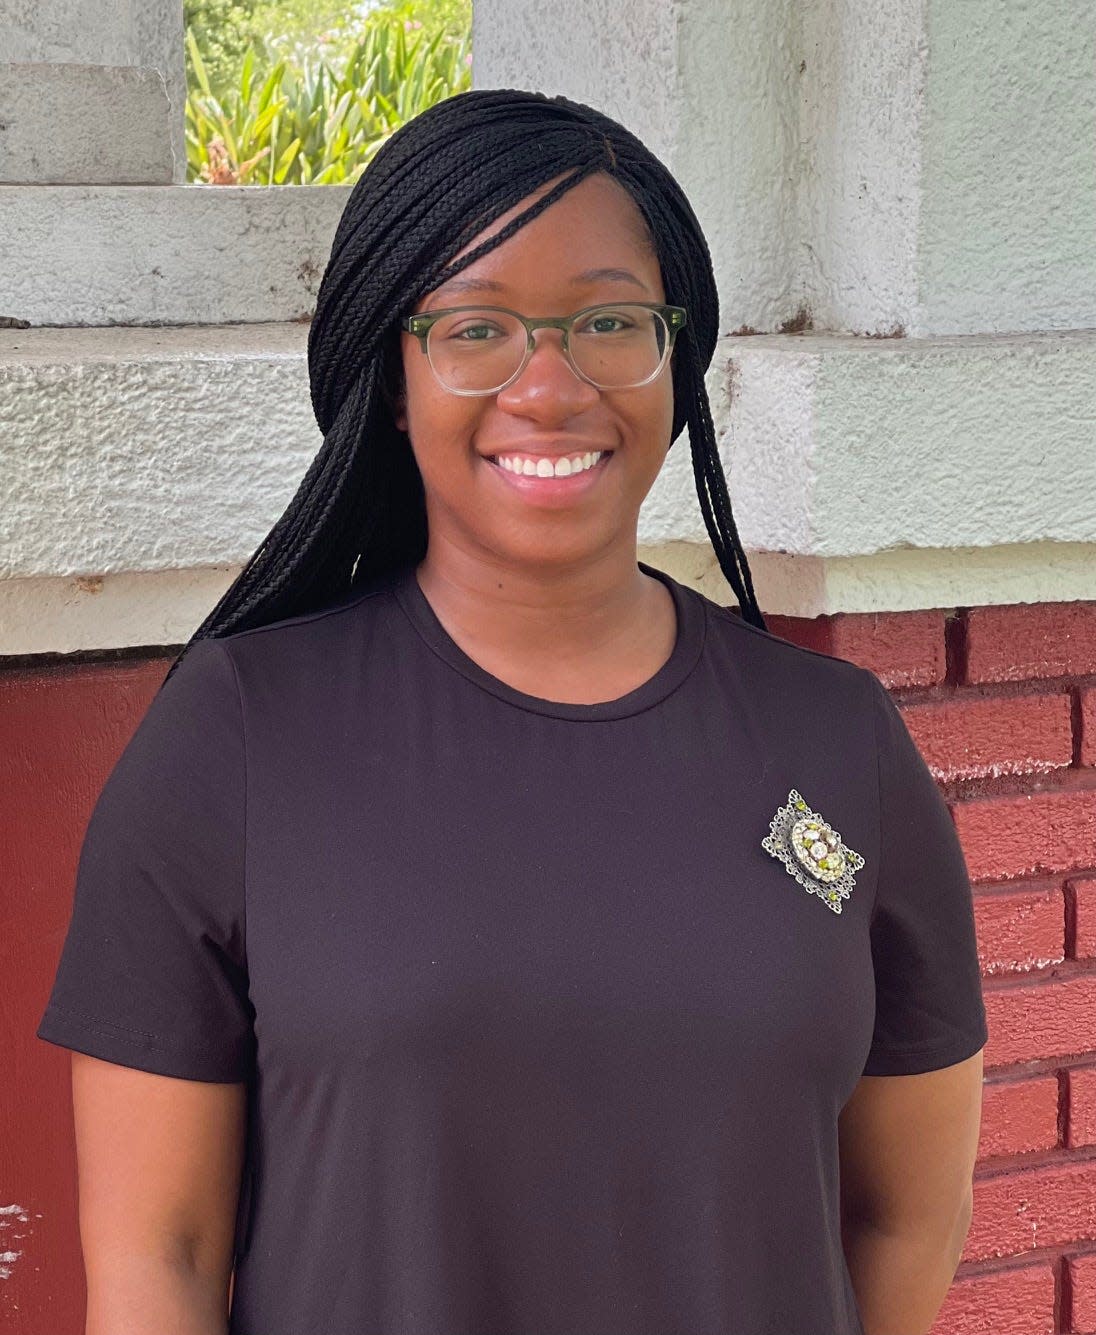 Kasandra Noel, 31, is the coordinator of the food program for Central Florida Health, a nonprofit that has served Polk, Hardee and Highlands counties for more than 50 years.